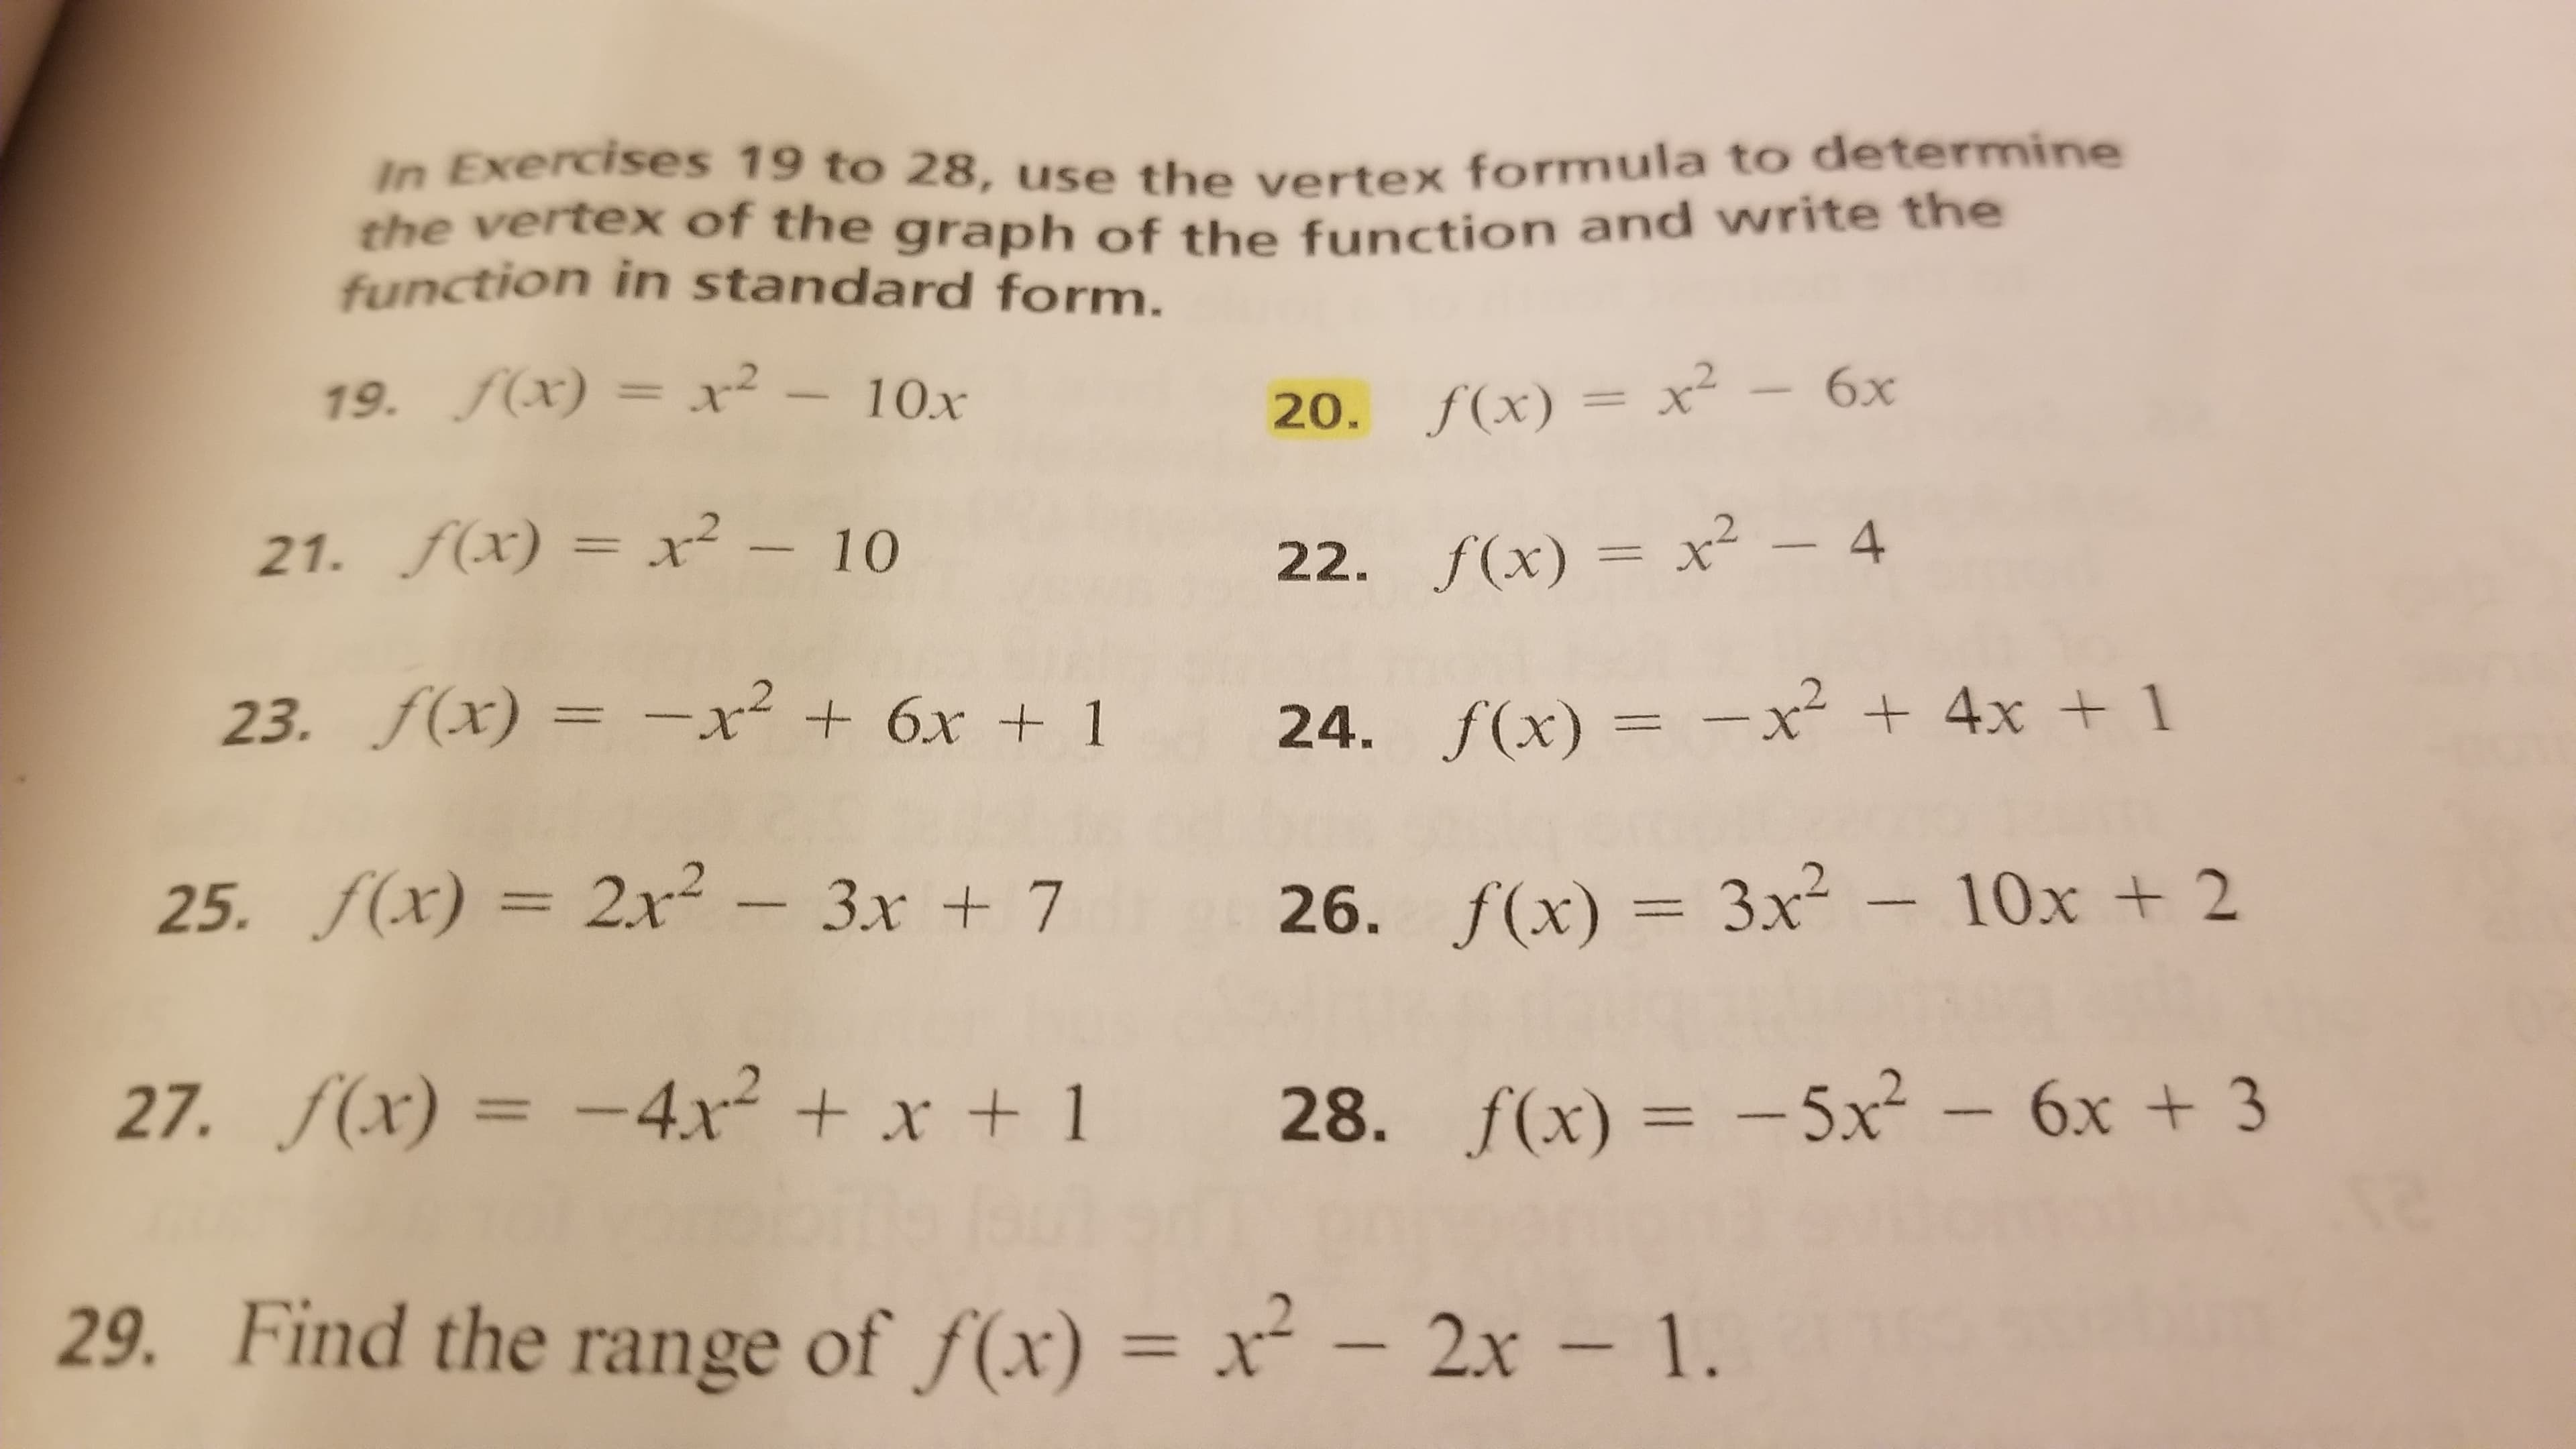 In Exercises 19 to 28, use the vertex formula to determine
the vertex of the graph of the function and write the
function in standard form.
19. f(x) = x²
- 10x
20. f(x) = x²
6x
21. f(x) = x² – 10
22. f(x) = x² – 4
23. f(x) = -x² + 6x + 1
24. f(x) = -x² + 4x + 1
%3D
25. f(x) =
2x²-3x + 7
26. f(x) = 3x² - 10x + 2
27. f(x) = -4x² + x + 1
28. f(x) = -5x² – 6x + 3
%3D
29. Find the range of f(x) = x² – 2x – 1.
%3D
